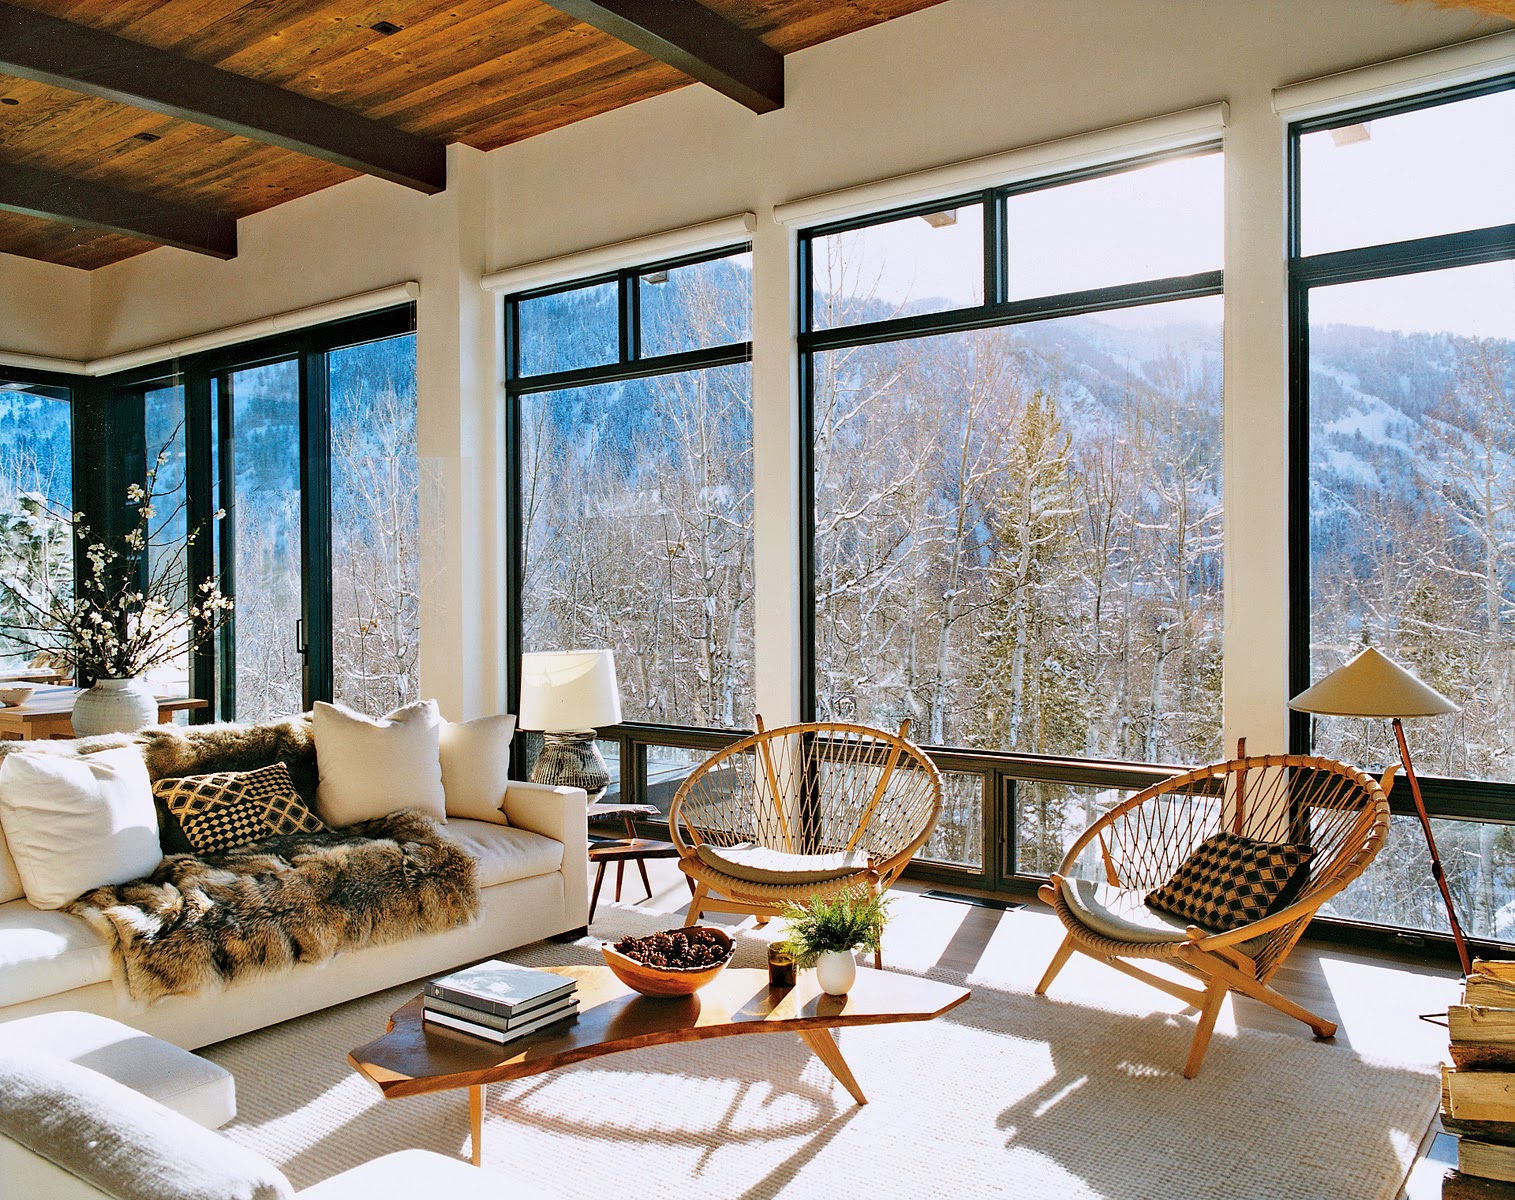 Aerin Lauder's modern winter home in Aspen with floor to ceiling windows